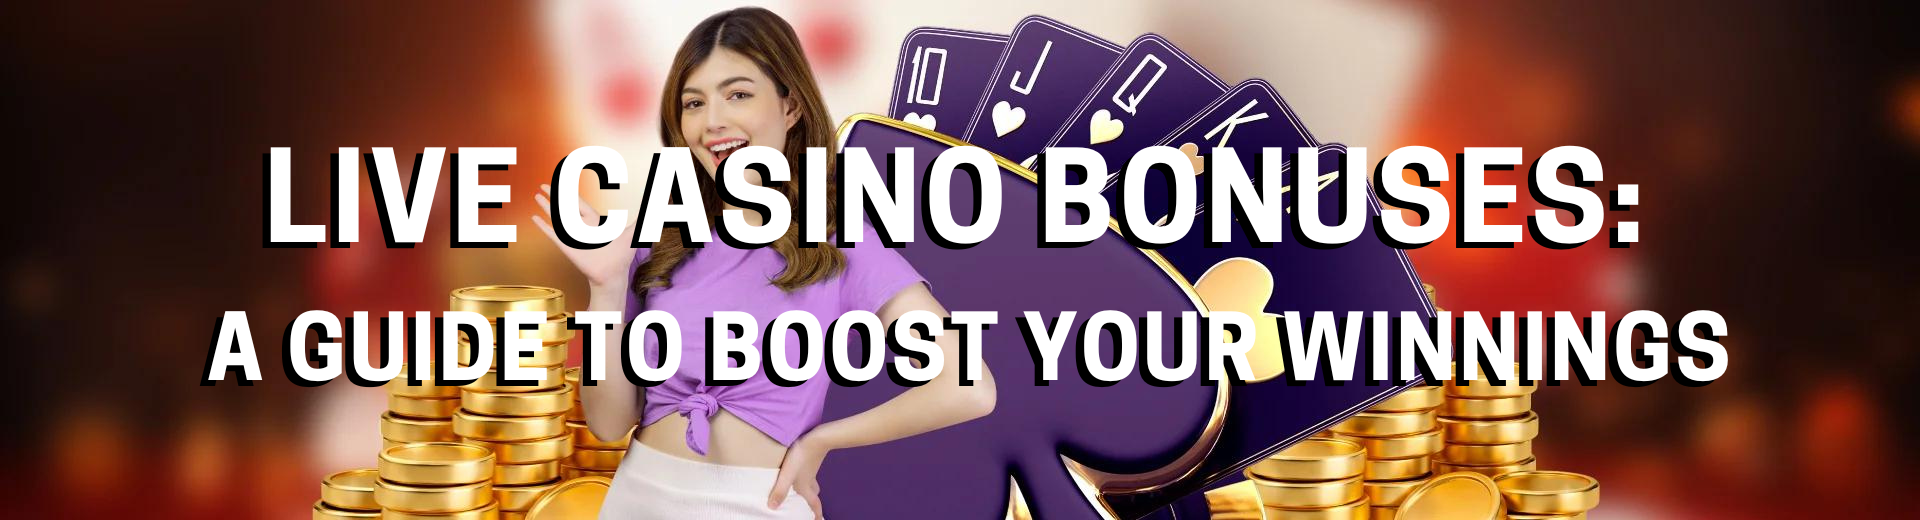 Live Casino Bonuses A Guide to Boost Your Winnings